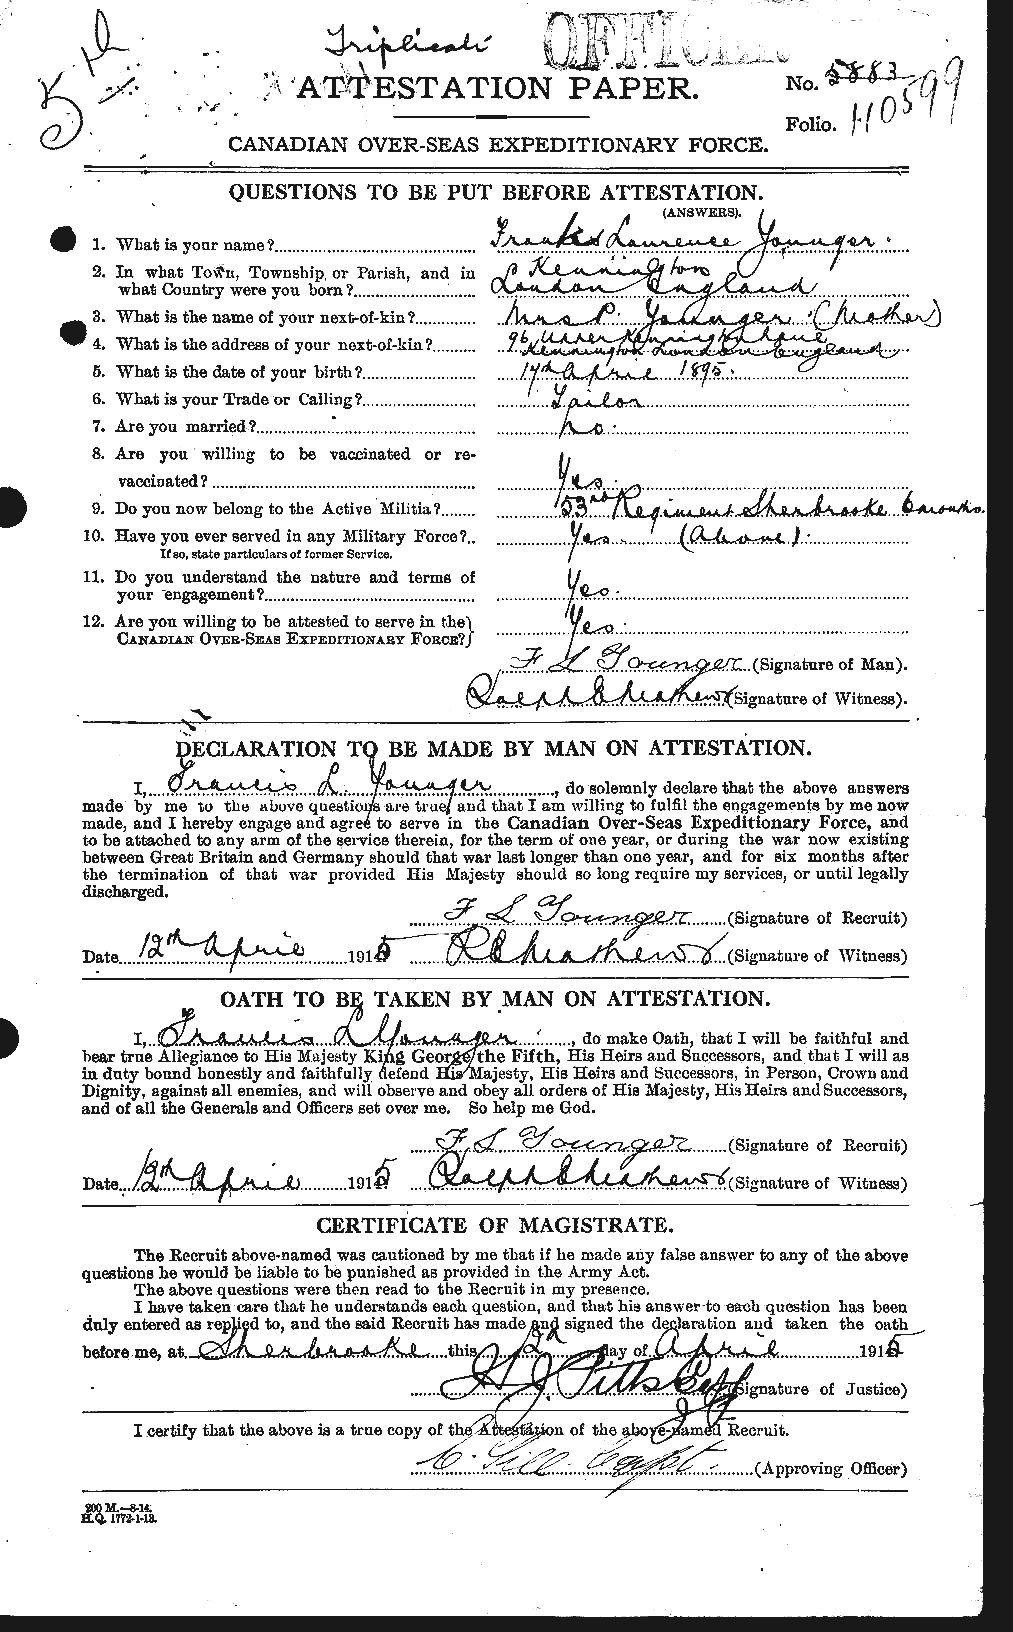 Attestation record: Frank Lawrence Younger